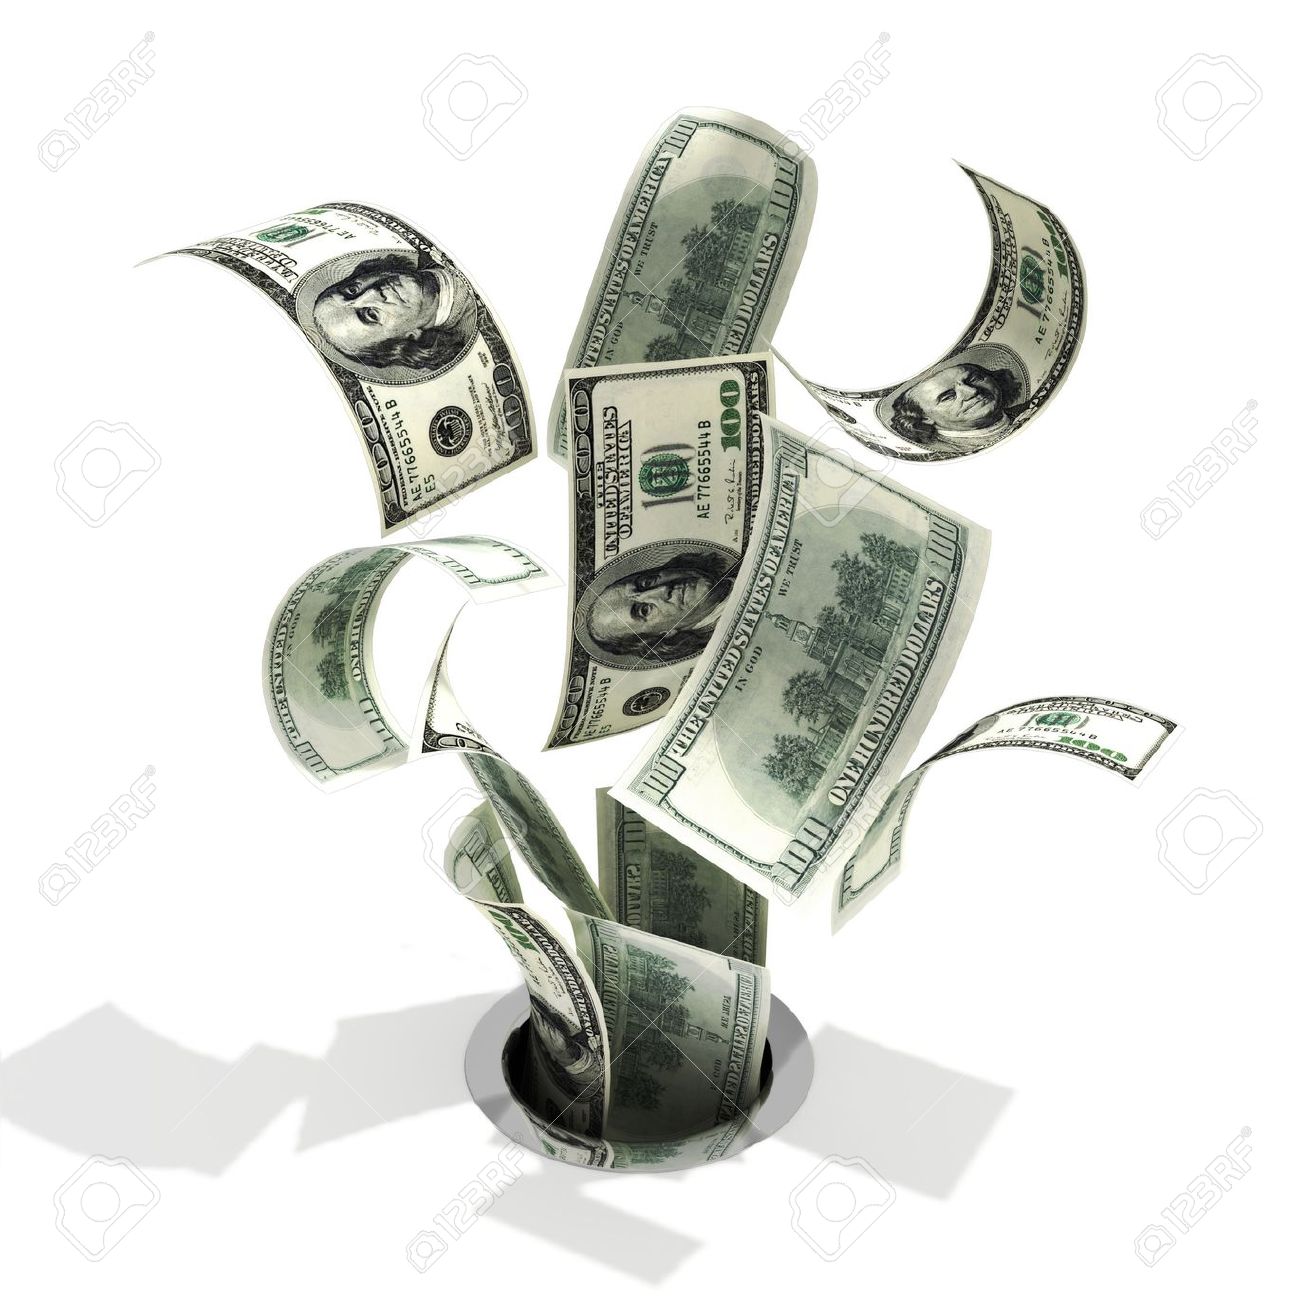 Lost Money Clipart images.